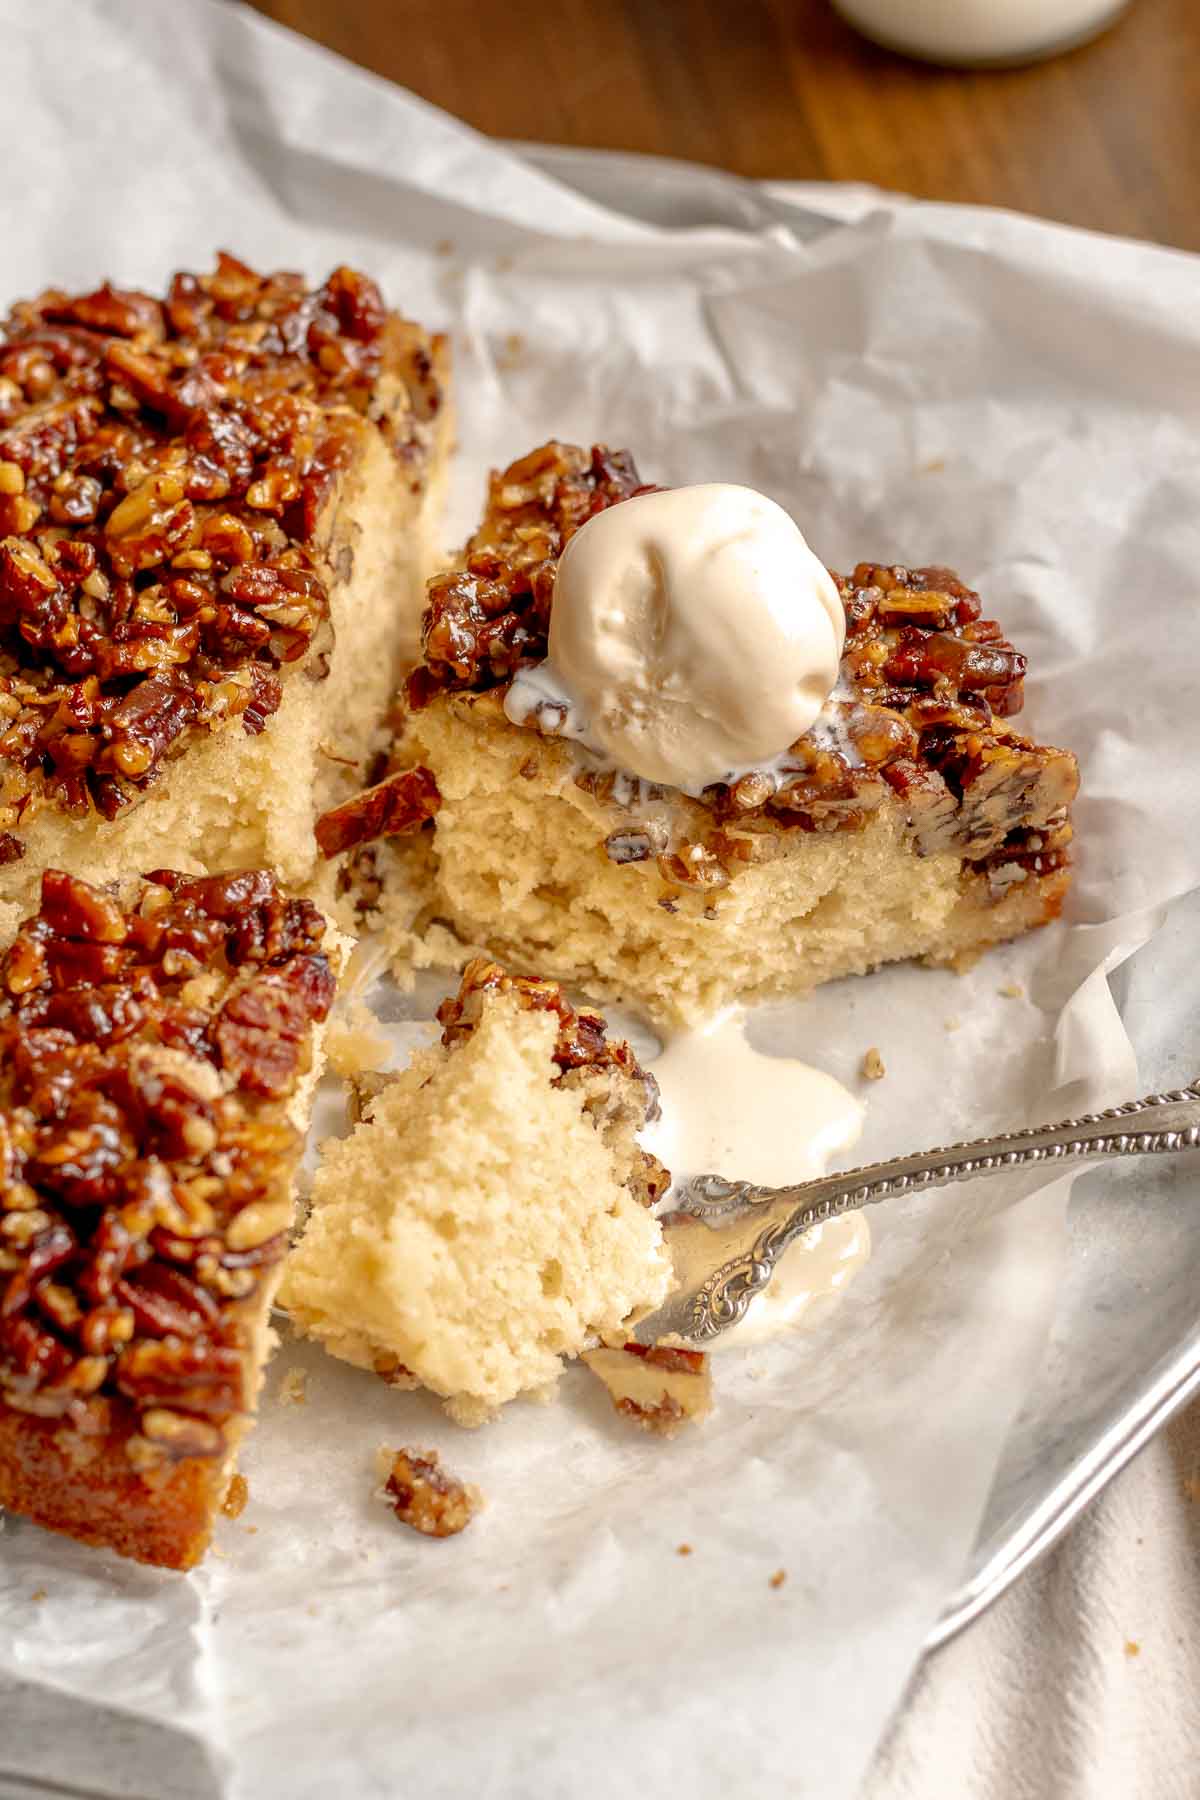 A fork removes a bite of upside down pecan cake on a platter with melted ice cream on top.